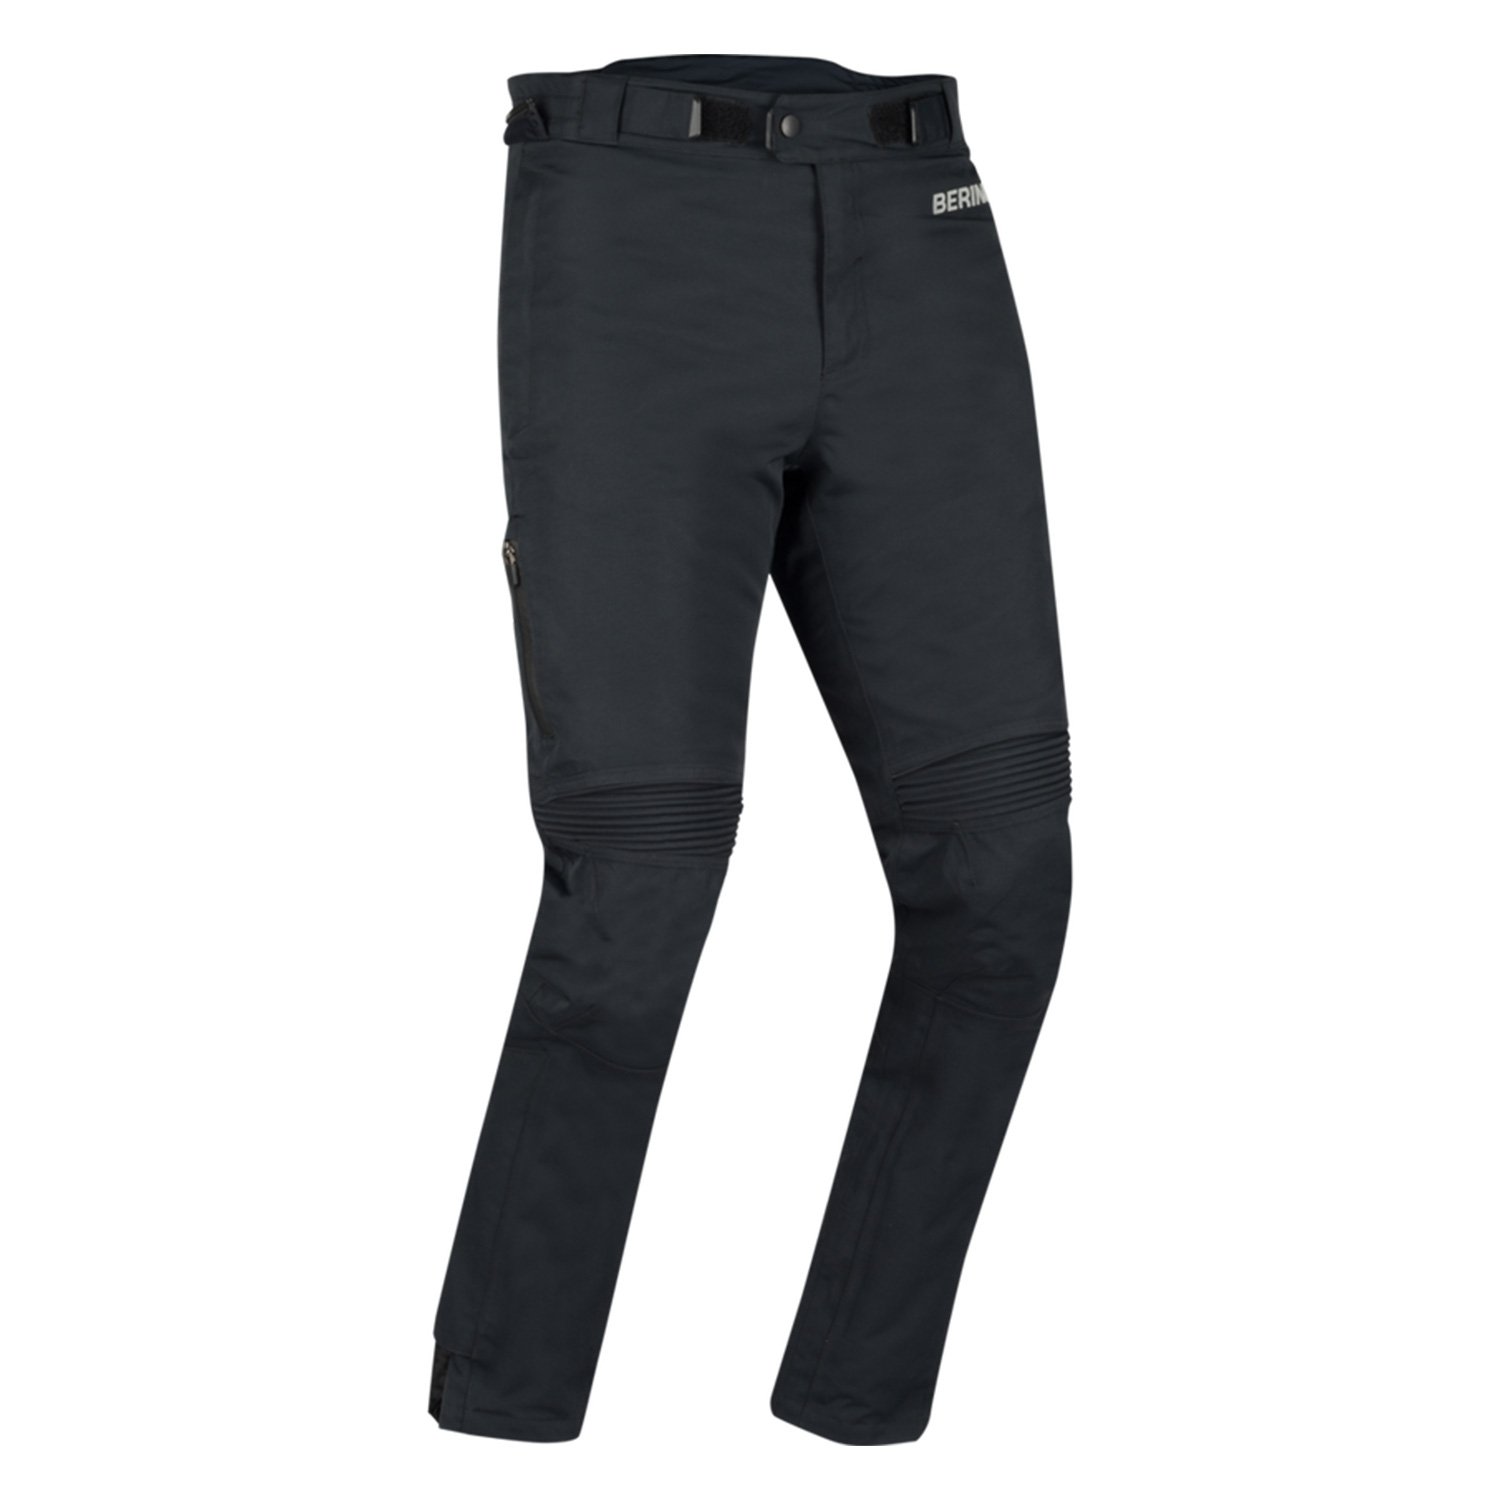 Image of Bering Zephyr Trousers Black Talla 2XL